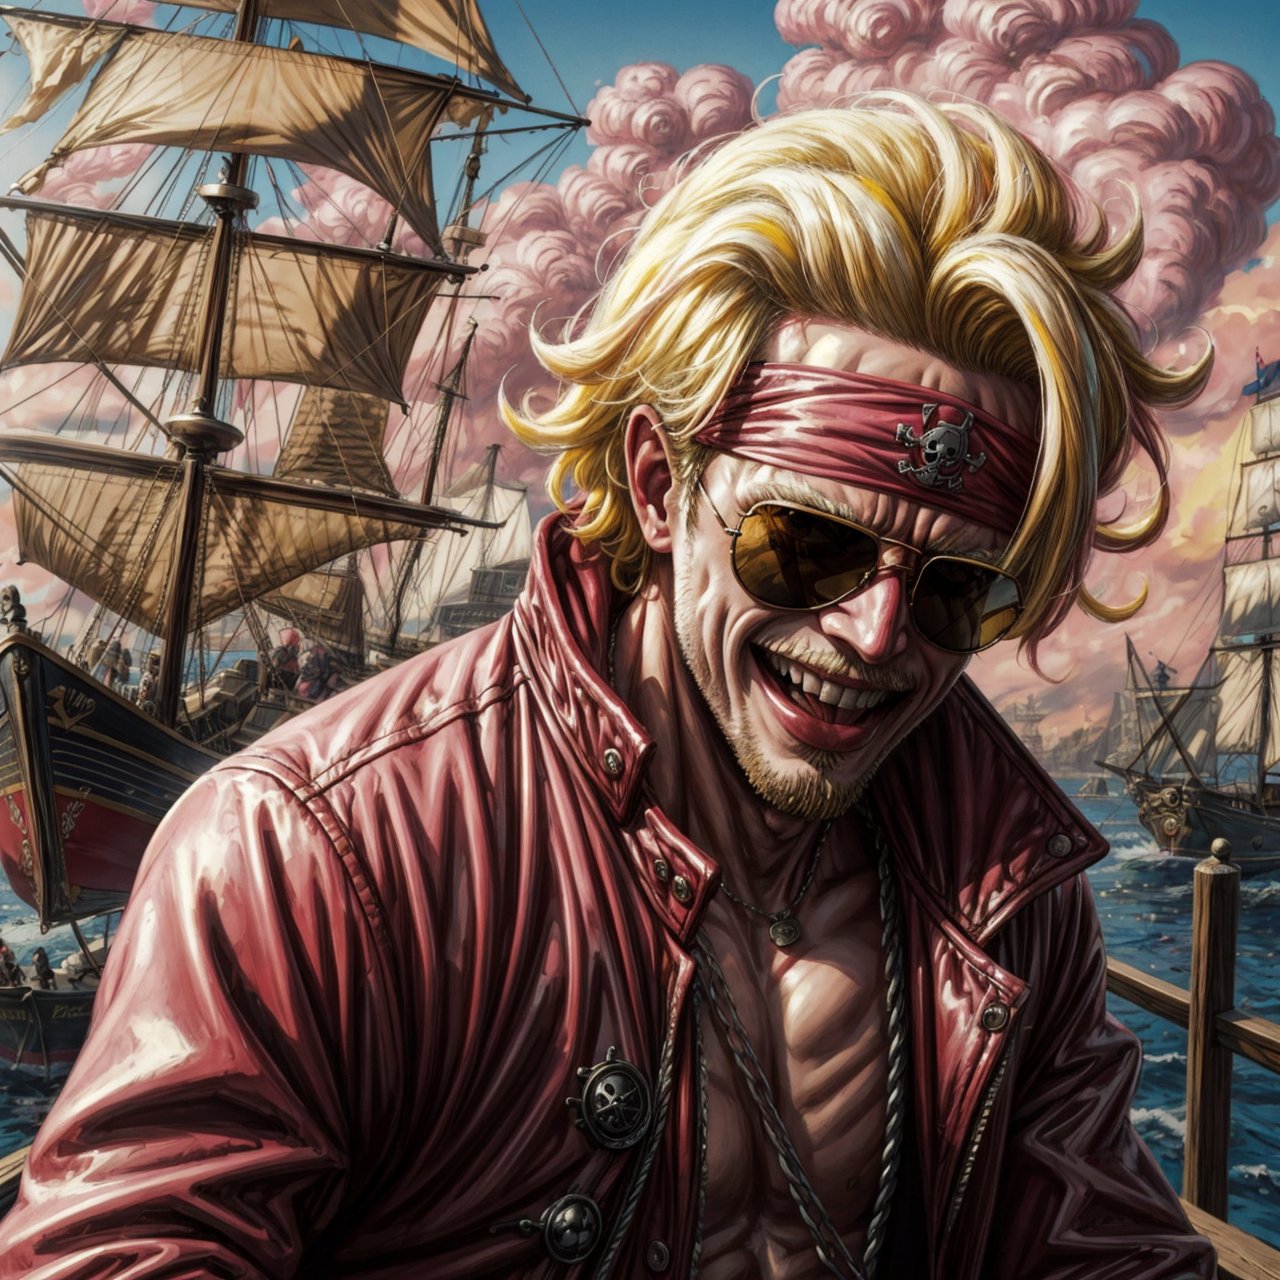 Best Quality, Masterpiece, Ultra High Resolution, Detailed Background, Doflamingo, one piece, yellow hair, red sunglasses, pink jacket, smile, pull the tongue, big tongue, face, portrait art,in a pirate ship, dynamic view, 4k Best Quality, chromatic_background, style, perfect eyes